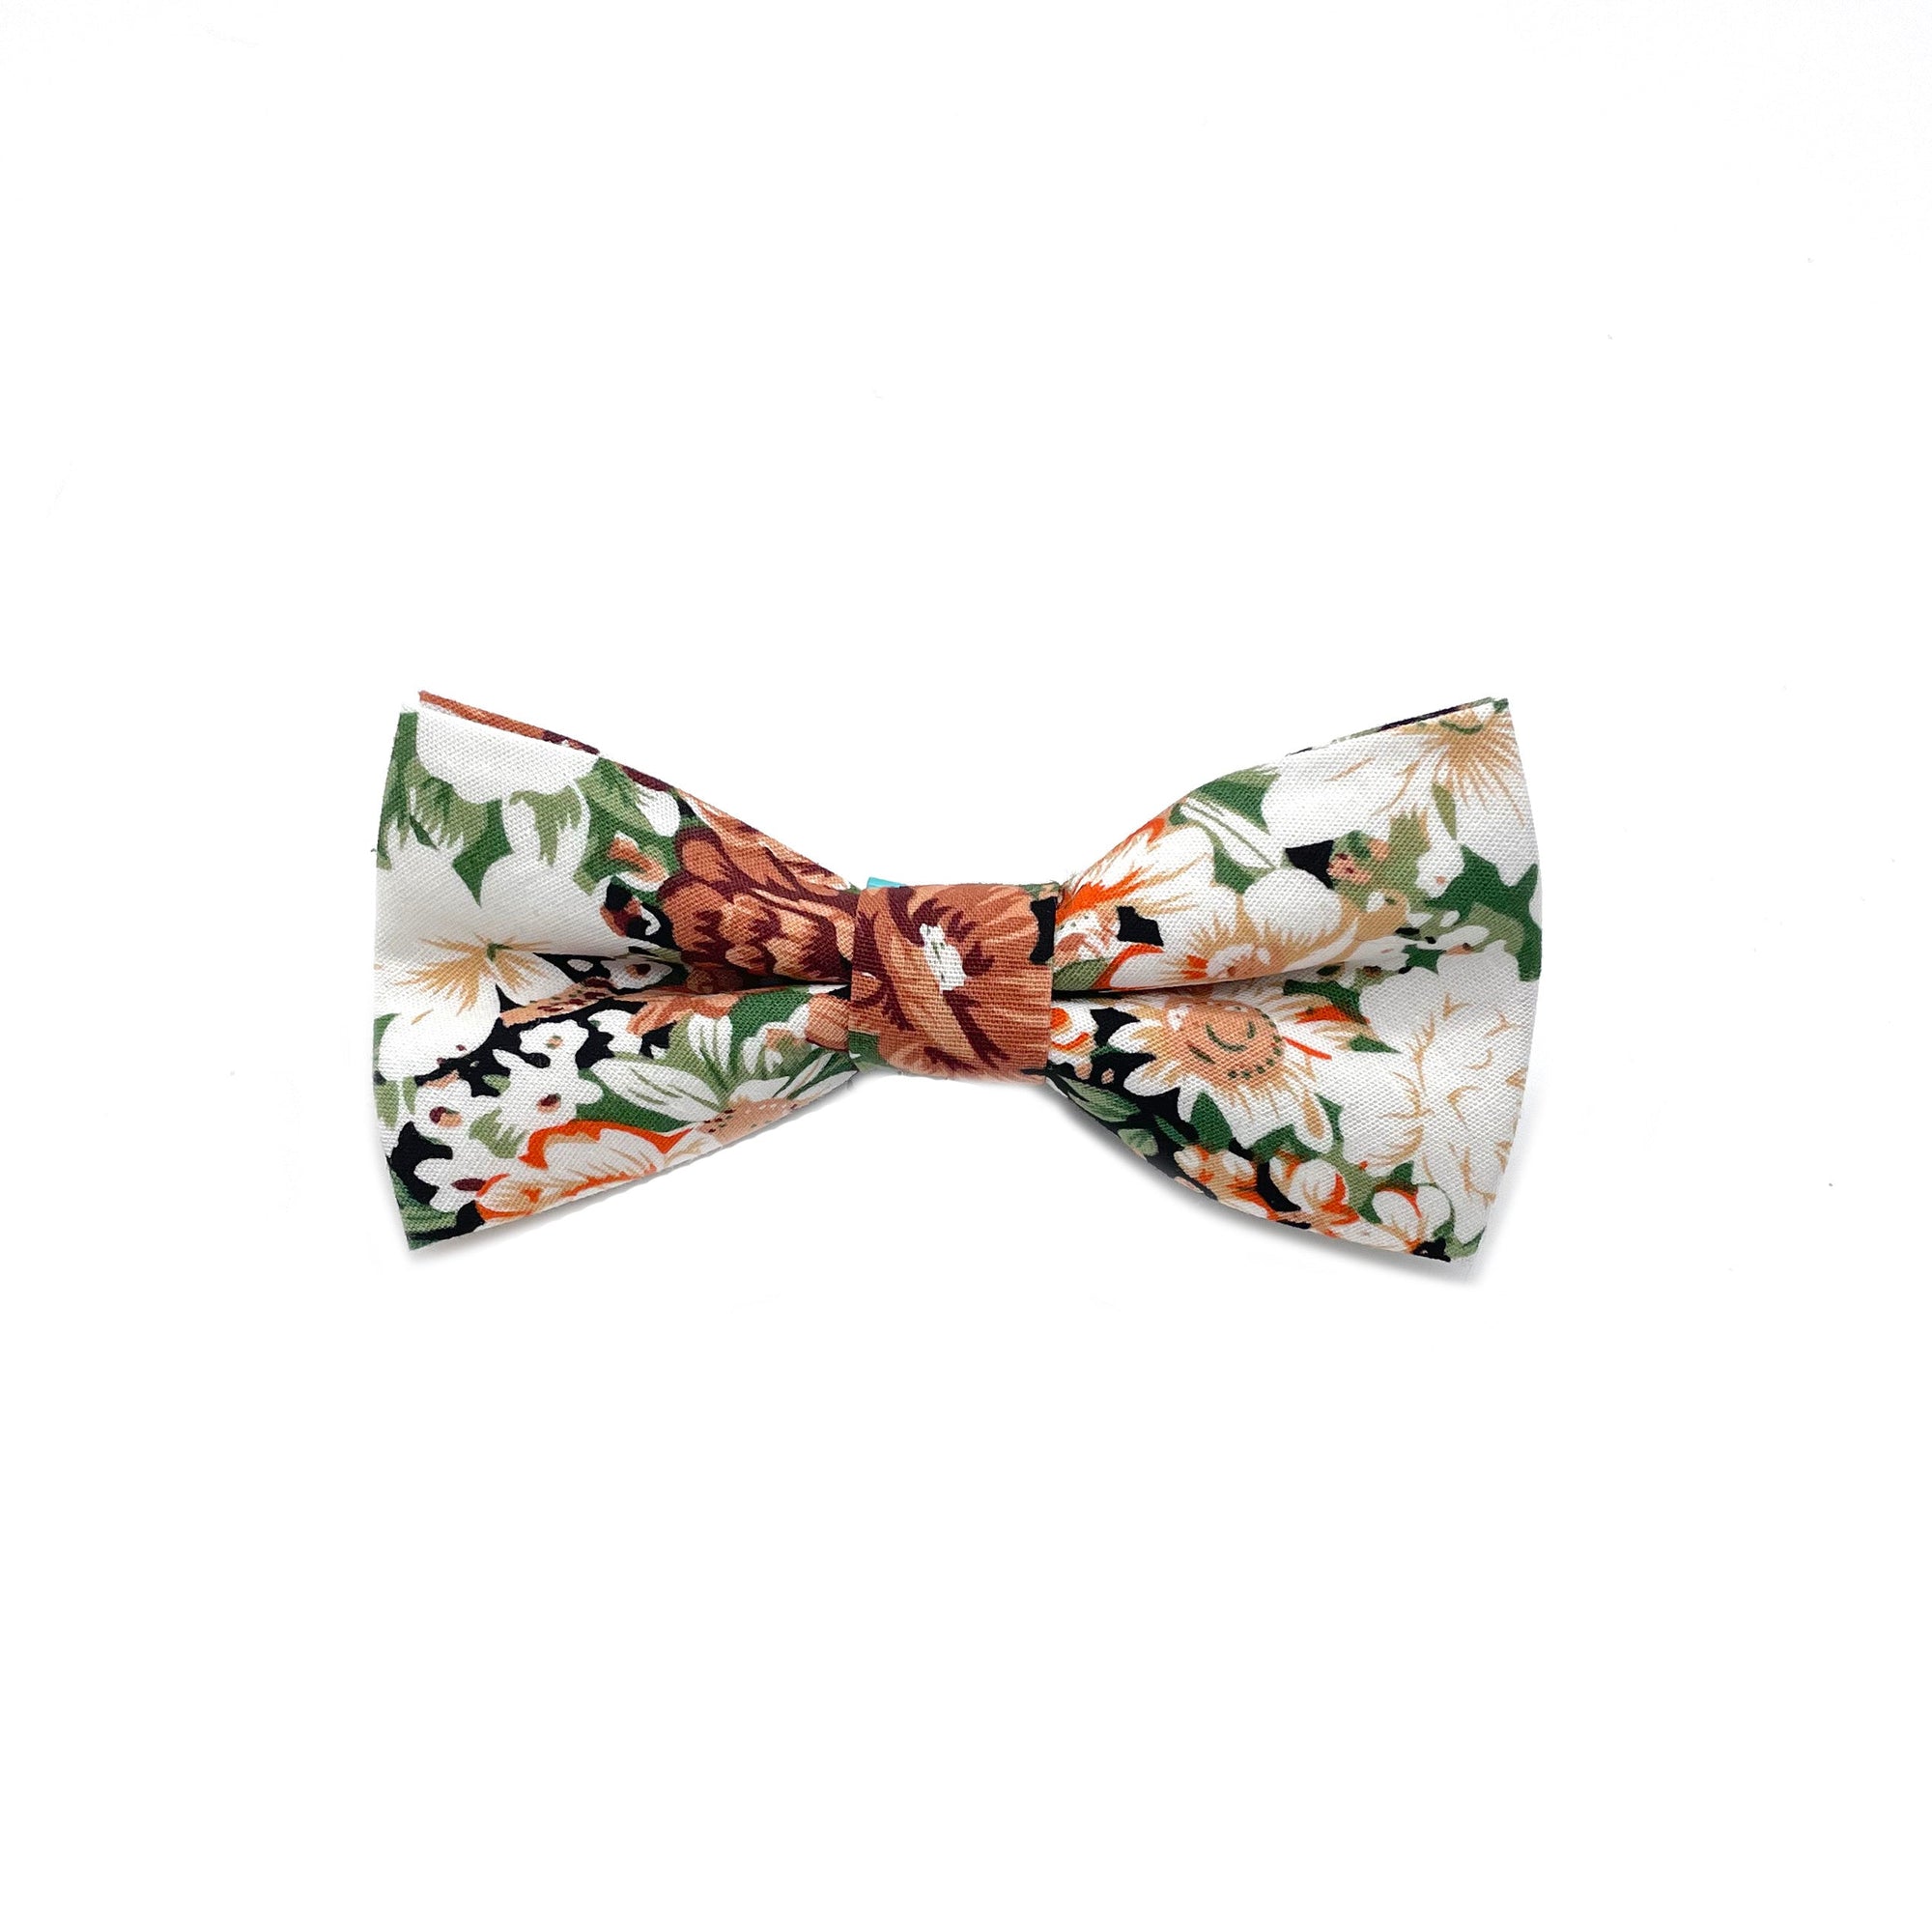 Orange Kids Floral Pre-Tied Bow Tie PEACH MYTIESHOP-Kids Floral Baby Bow tie PEACH Color: Orange and Black Strap is adjustablePre-Tied bowtieBow Tie 10.5 * 6CM Great for Prom Dinners Interviews Photo shoots Photo sessions Dates Wedding Attendant Ring Bearers Fits toddlers and babies. Evabder baby ow tie toddler bow tie floral for wedding and events groom groomsmen flower bow tie mytieshop ring bearer page boy bow tie white bow tie white and blue tie kids bowtie floral Adjustable wedding attire f